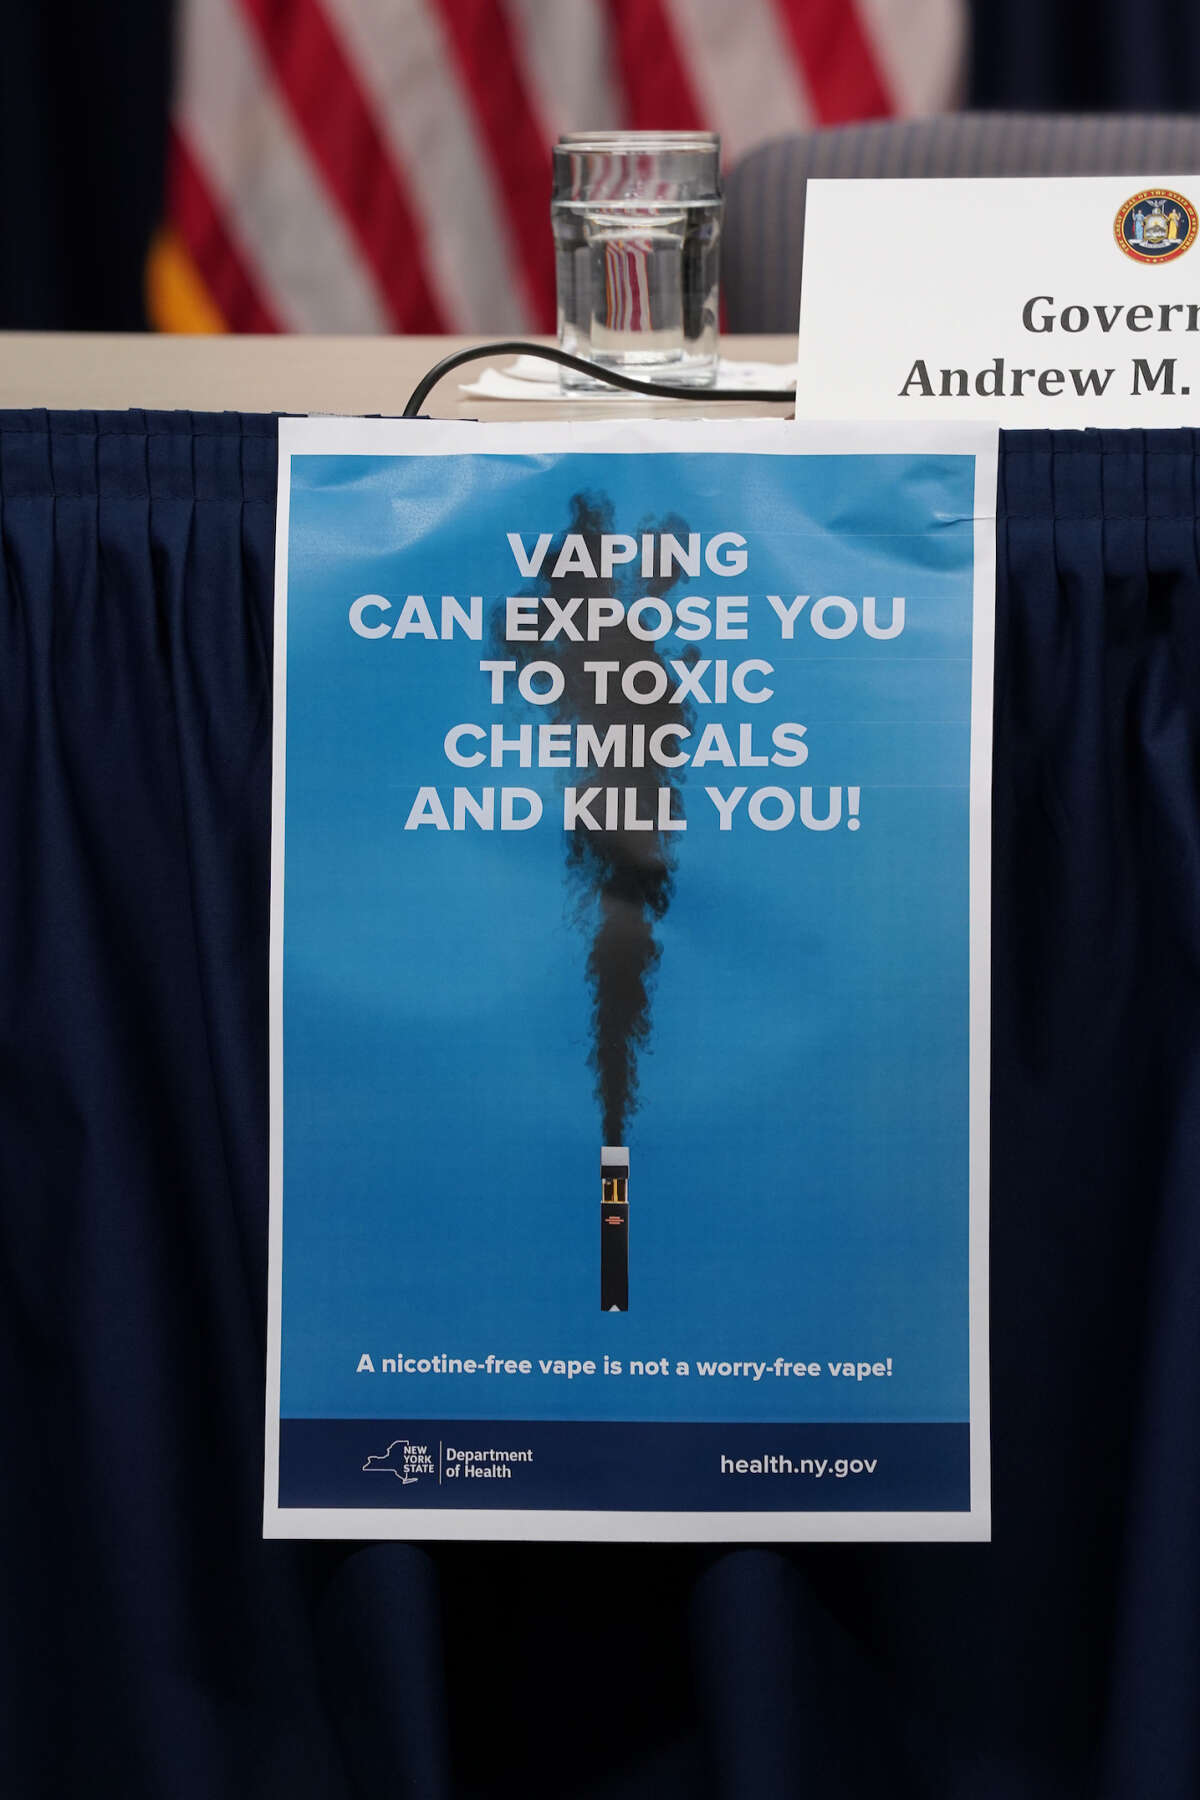 New York Gov. Andrew Cuomo announced Monday, Sept. 9, 2019 that his administration is taking several steps to address a surge of vaping-related illnesses known to have killed at least five people this summer.